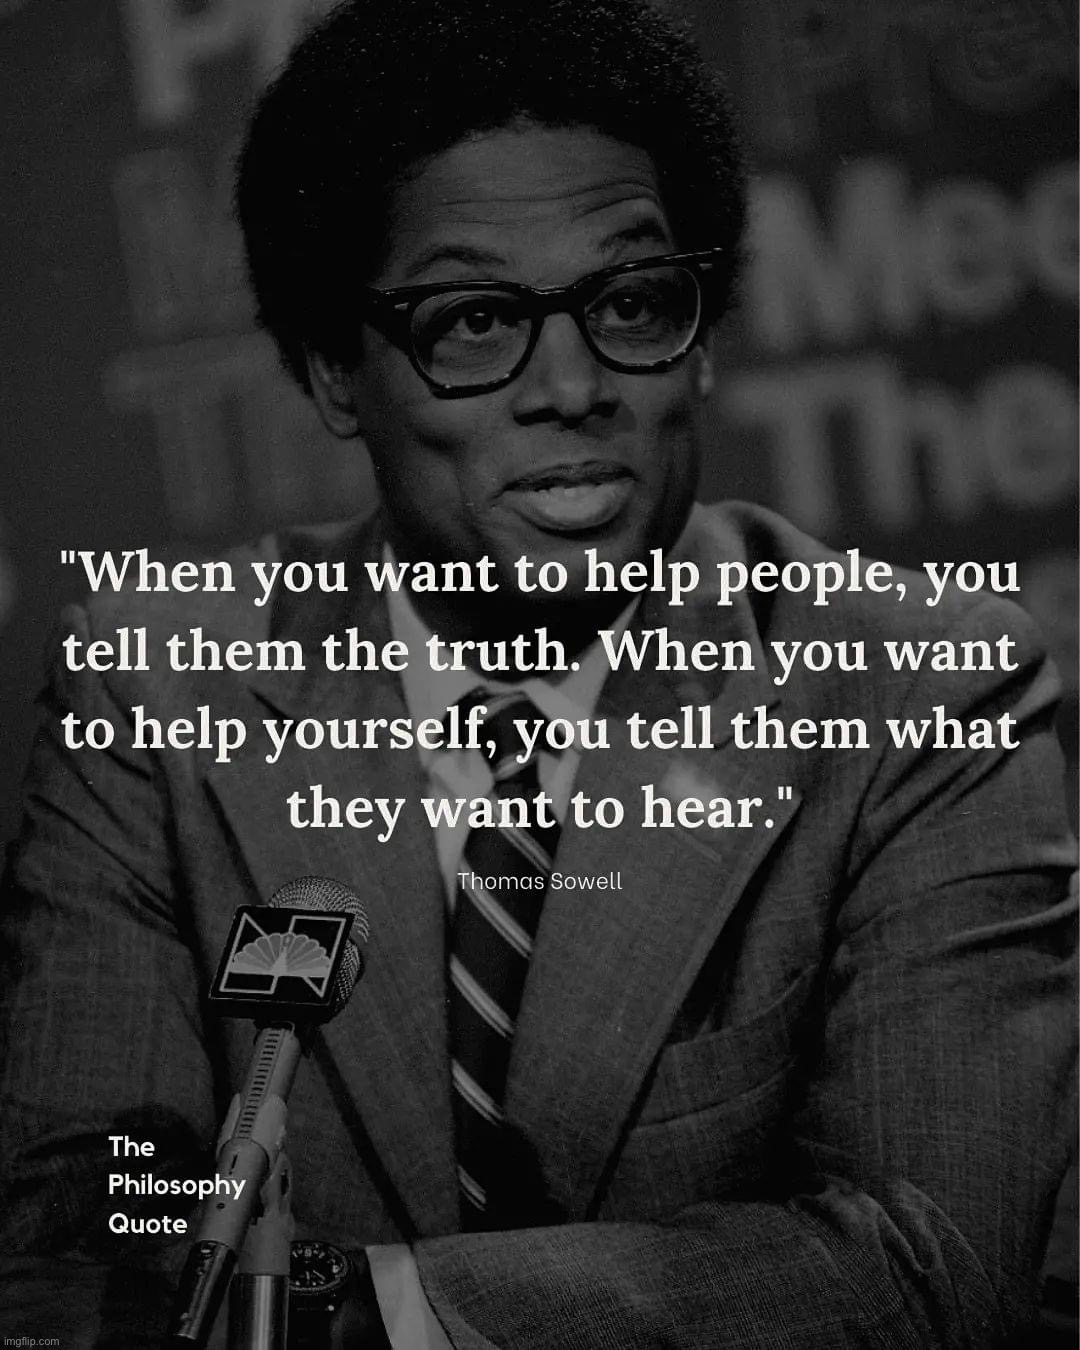 Thomas Sowell quote | image tagged in thomas sowell quote | made w/ Imgflip meme maker